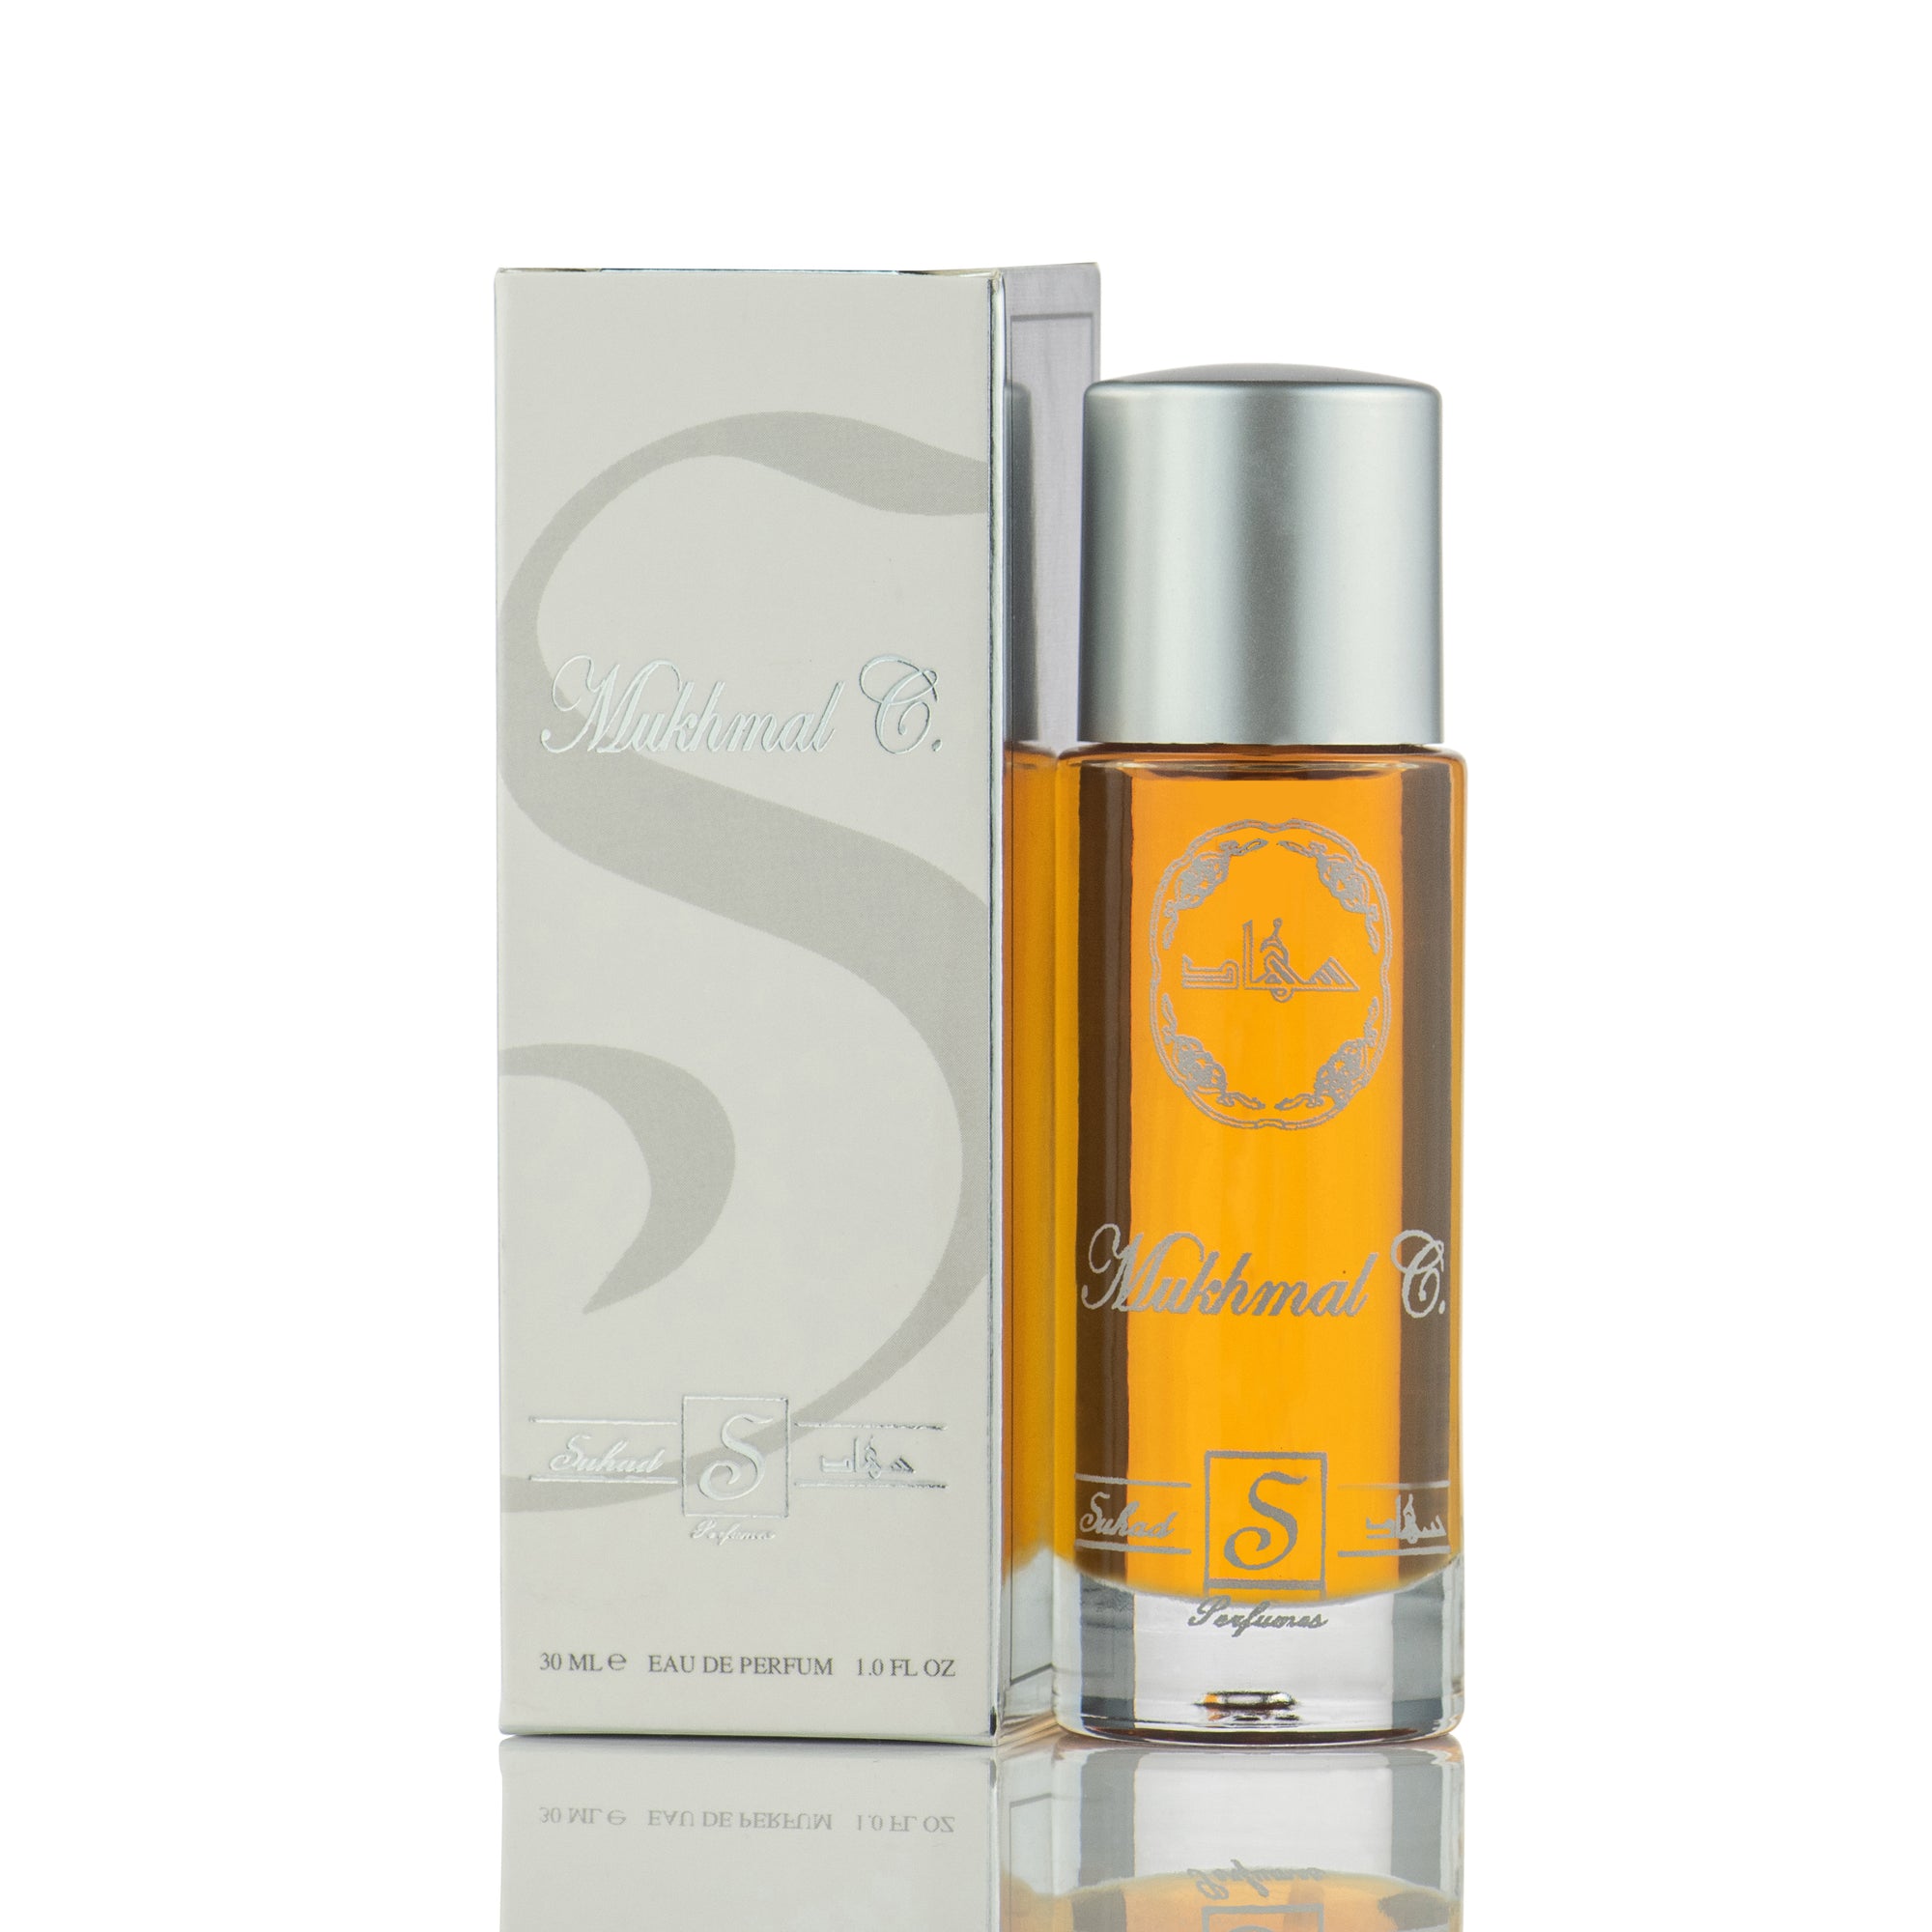 MUKHMAL C (CONCENTRATED BODY OIL)